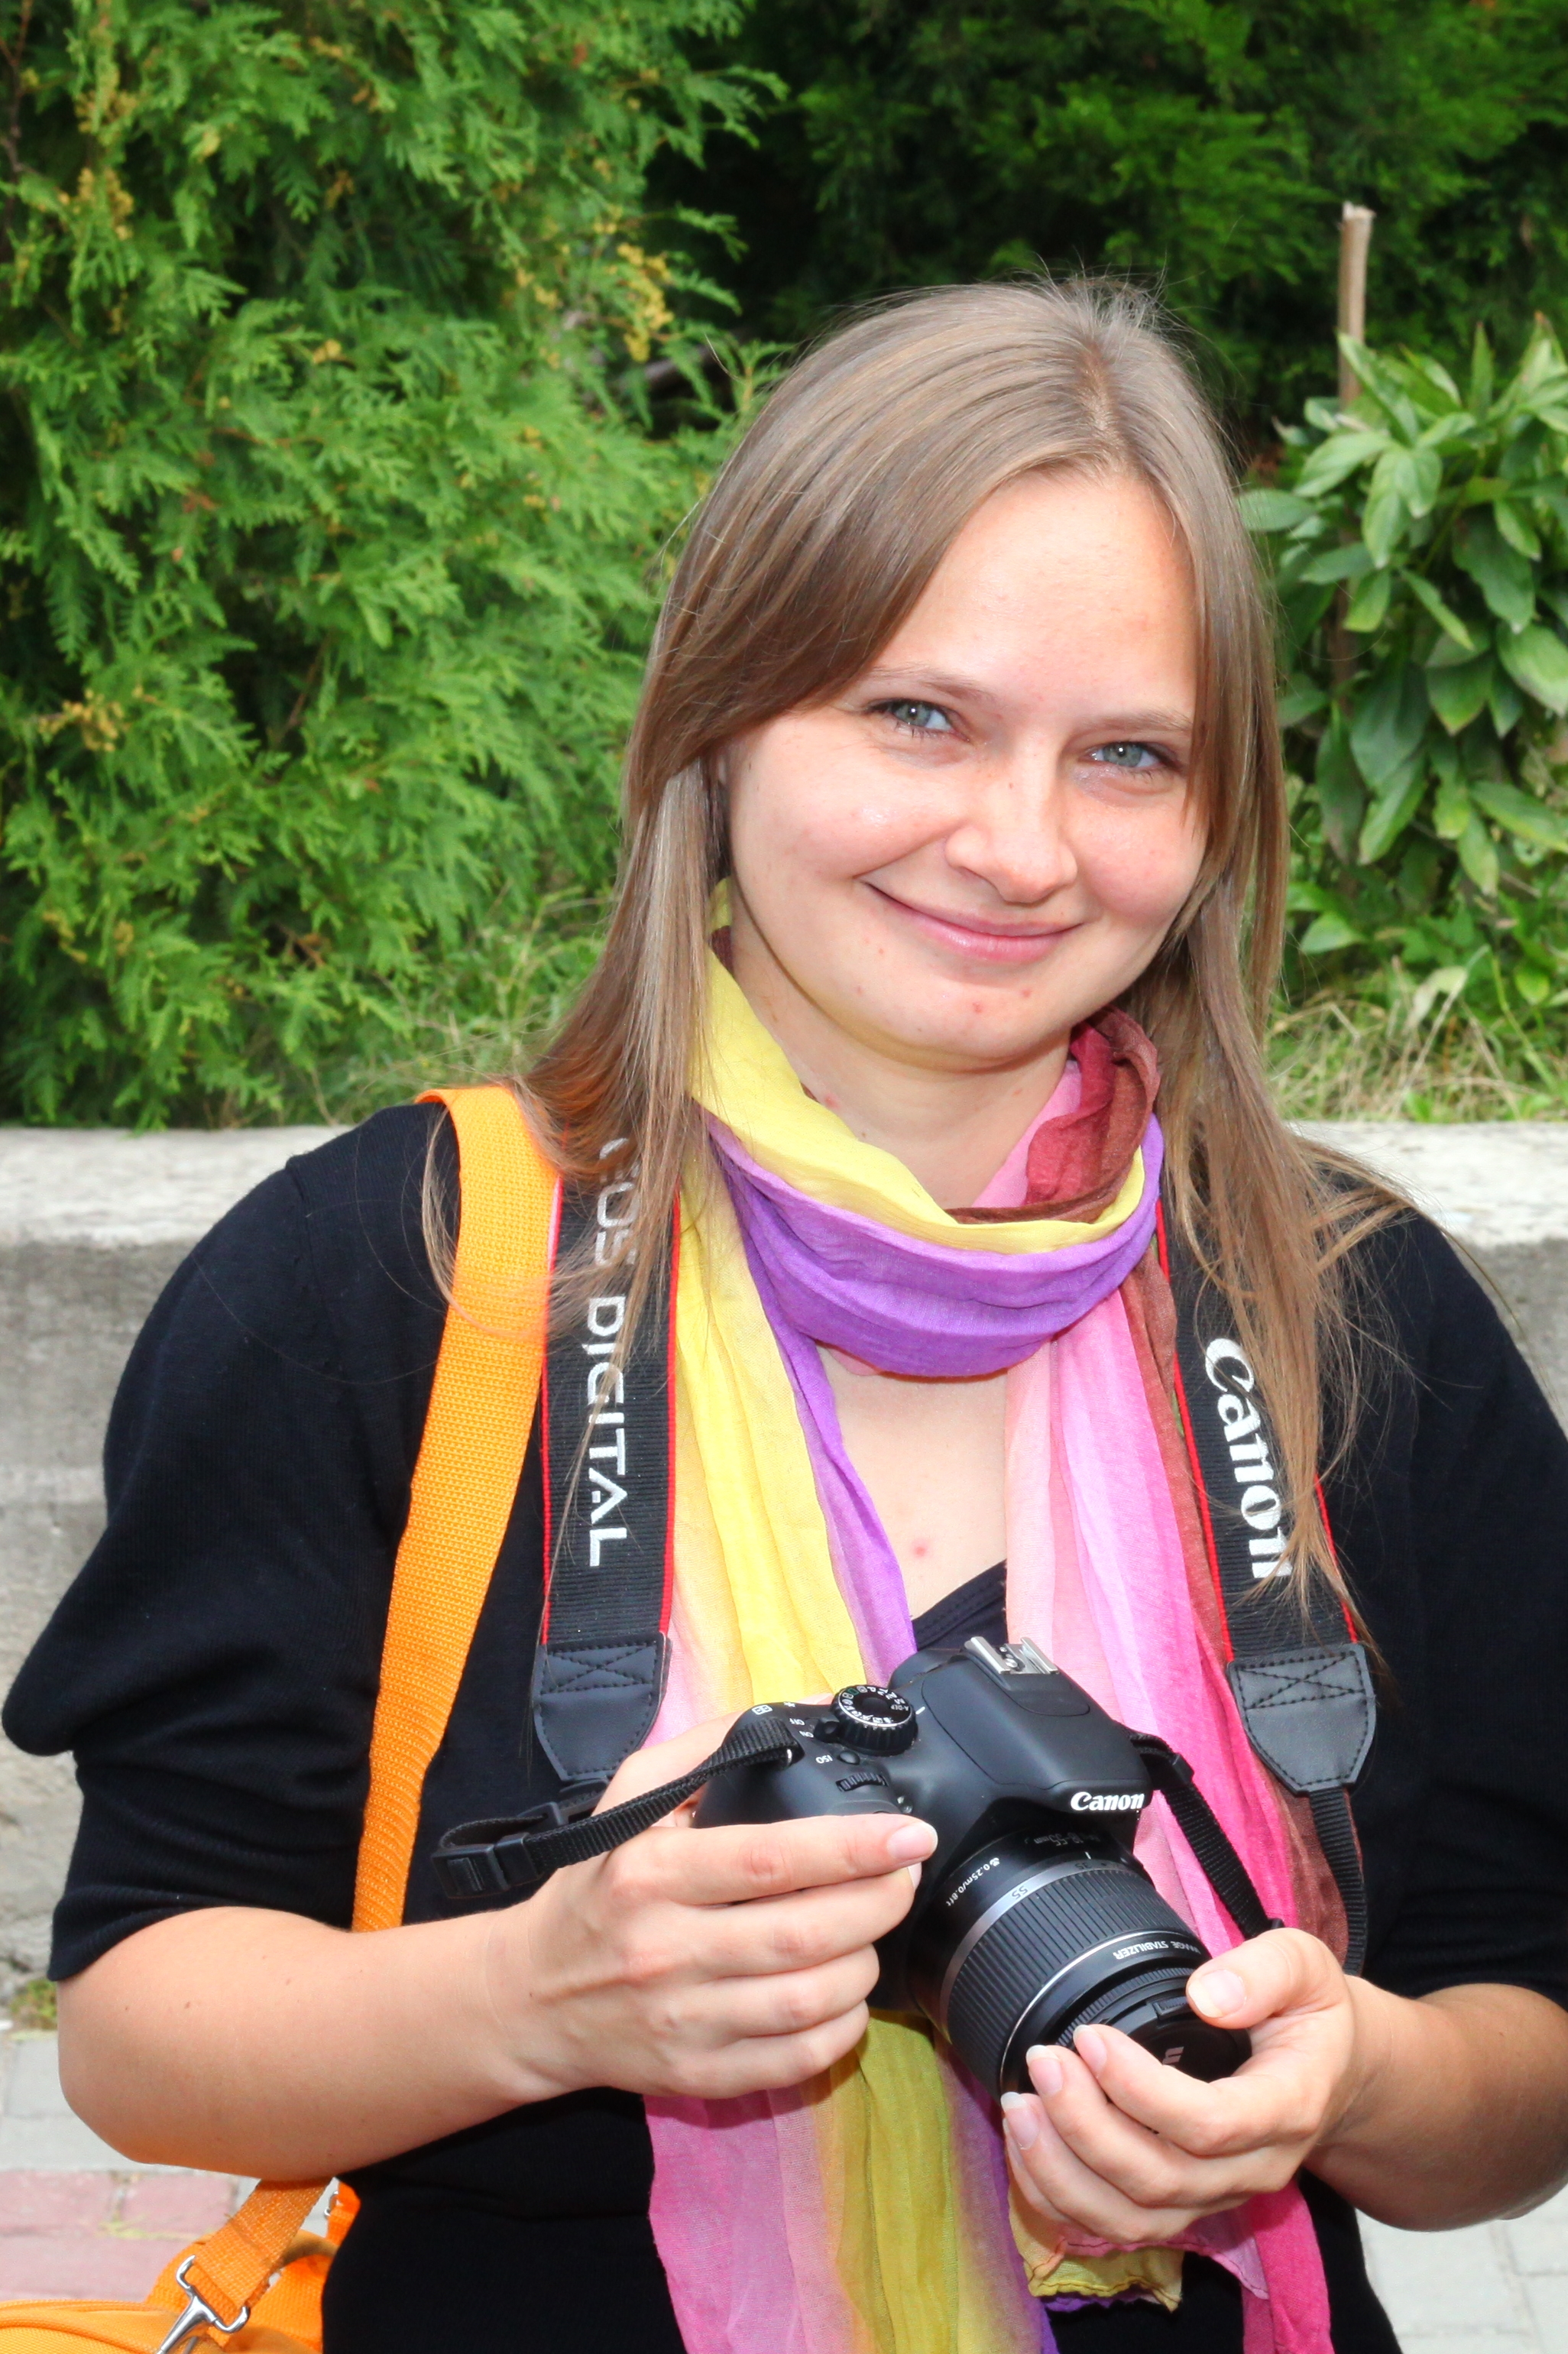 A pretty fair-haired girl / chick / young woman (journalist) with a Canon camera, photo 2.